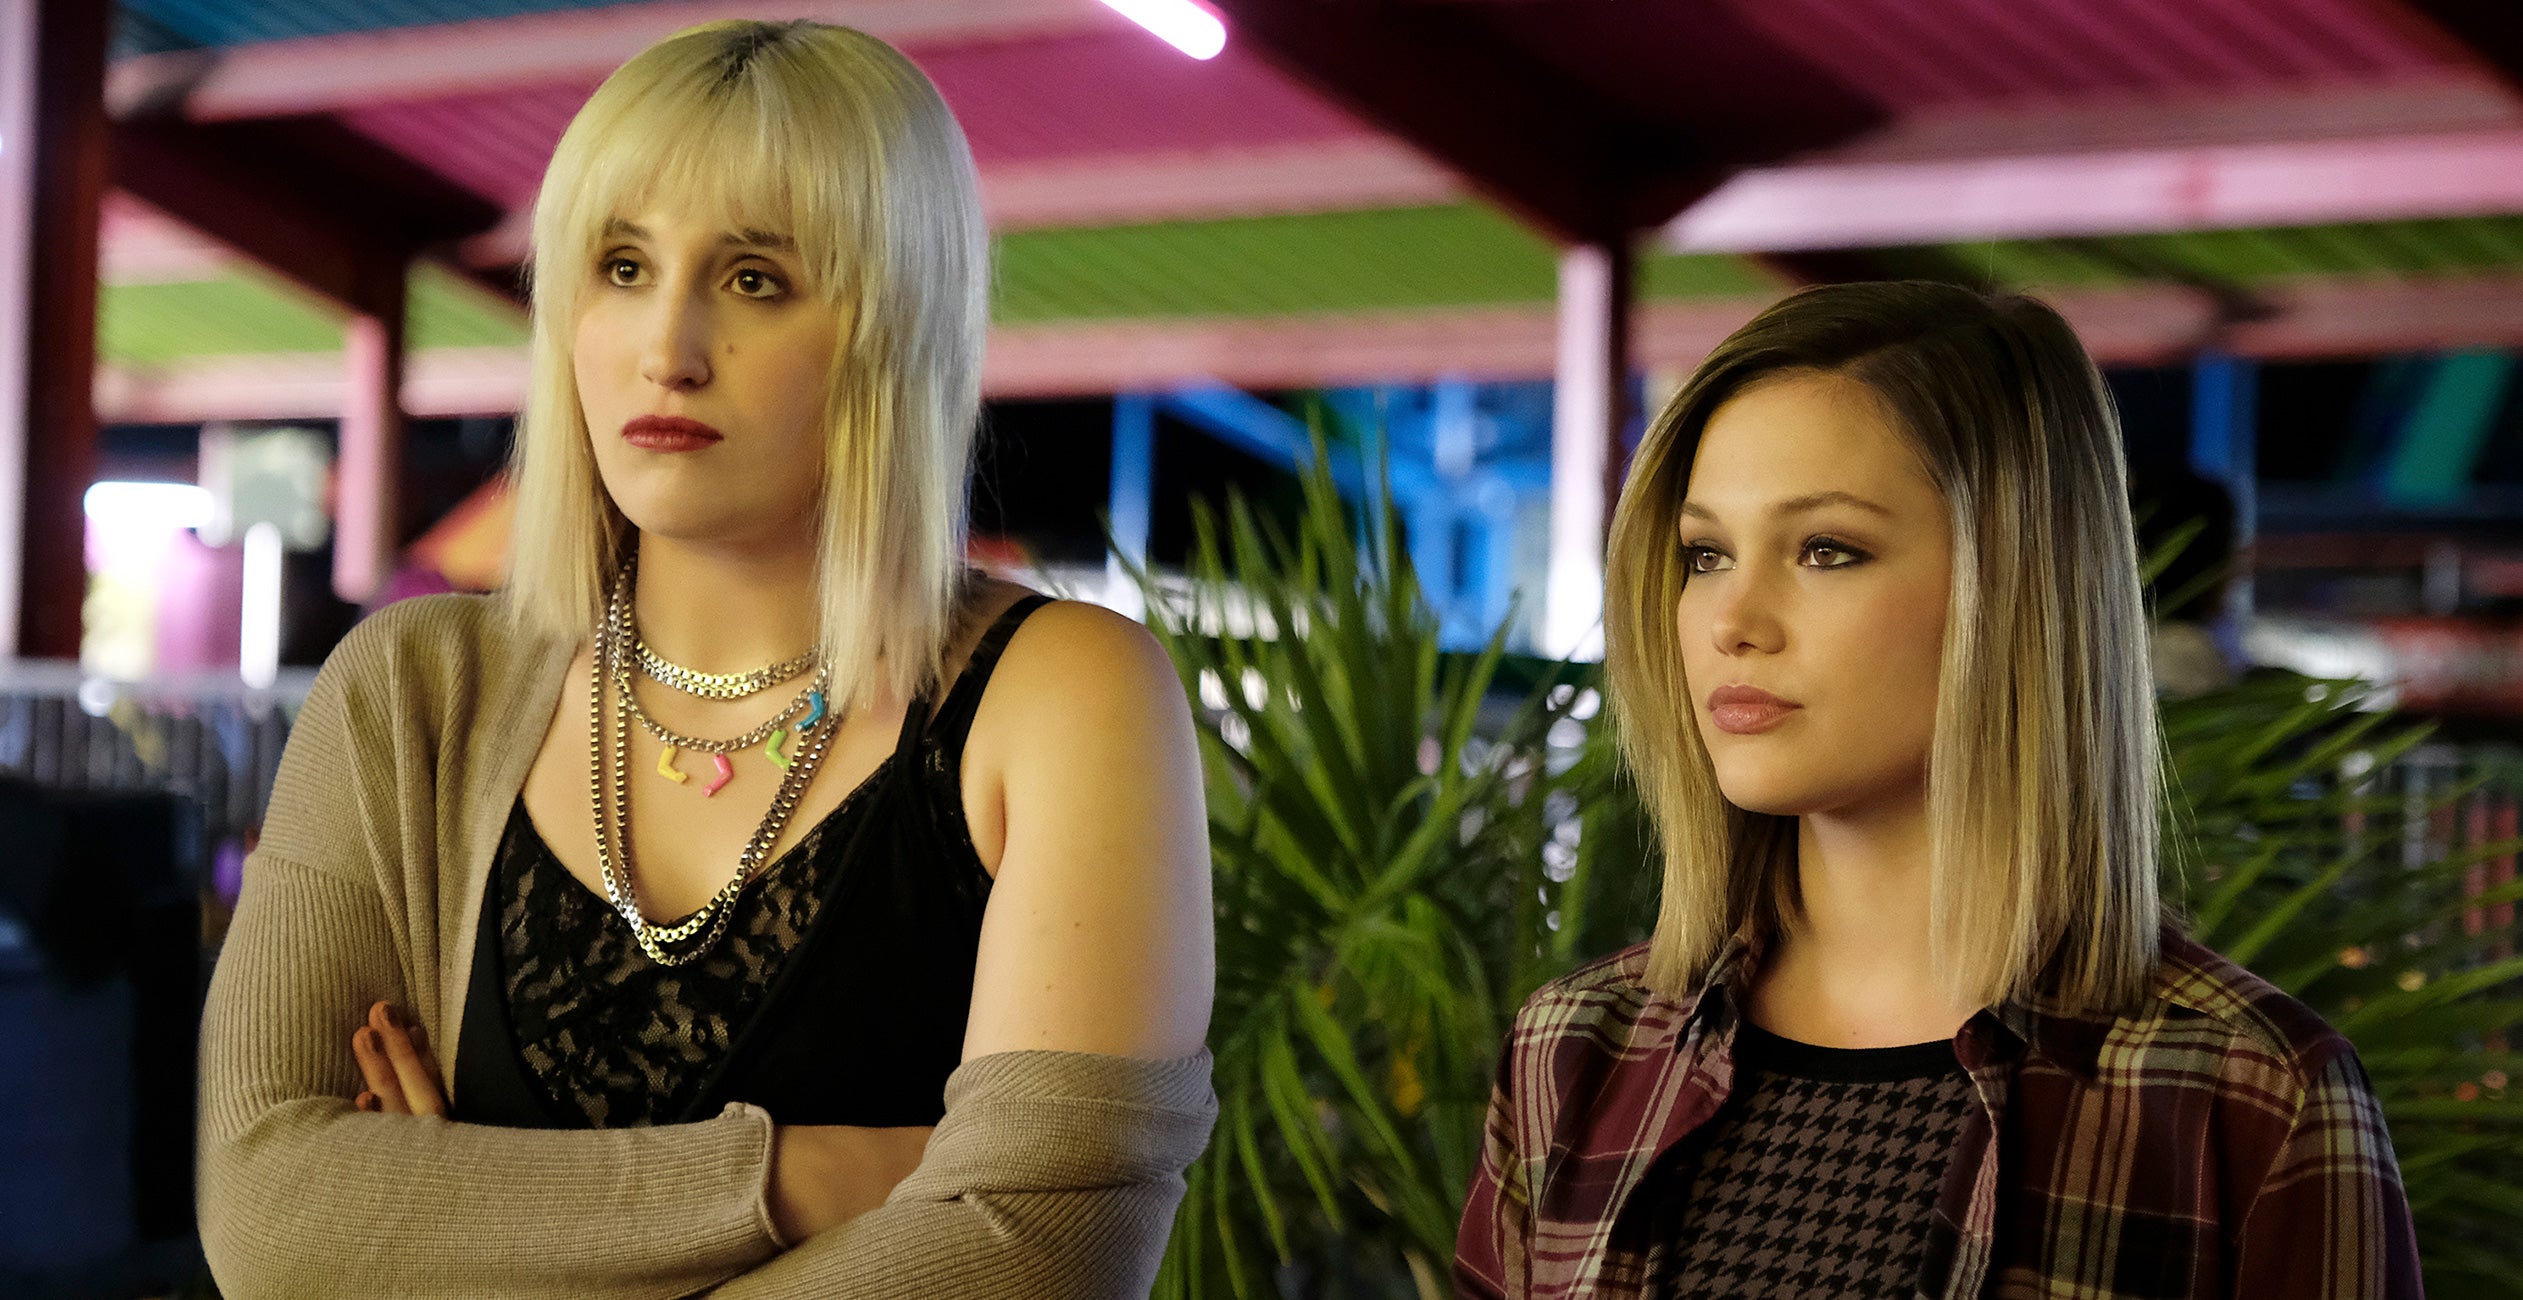 Mallory From Cruel Summer Harley Quinn Smith Interview image